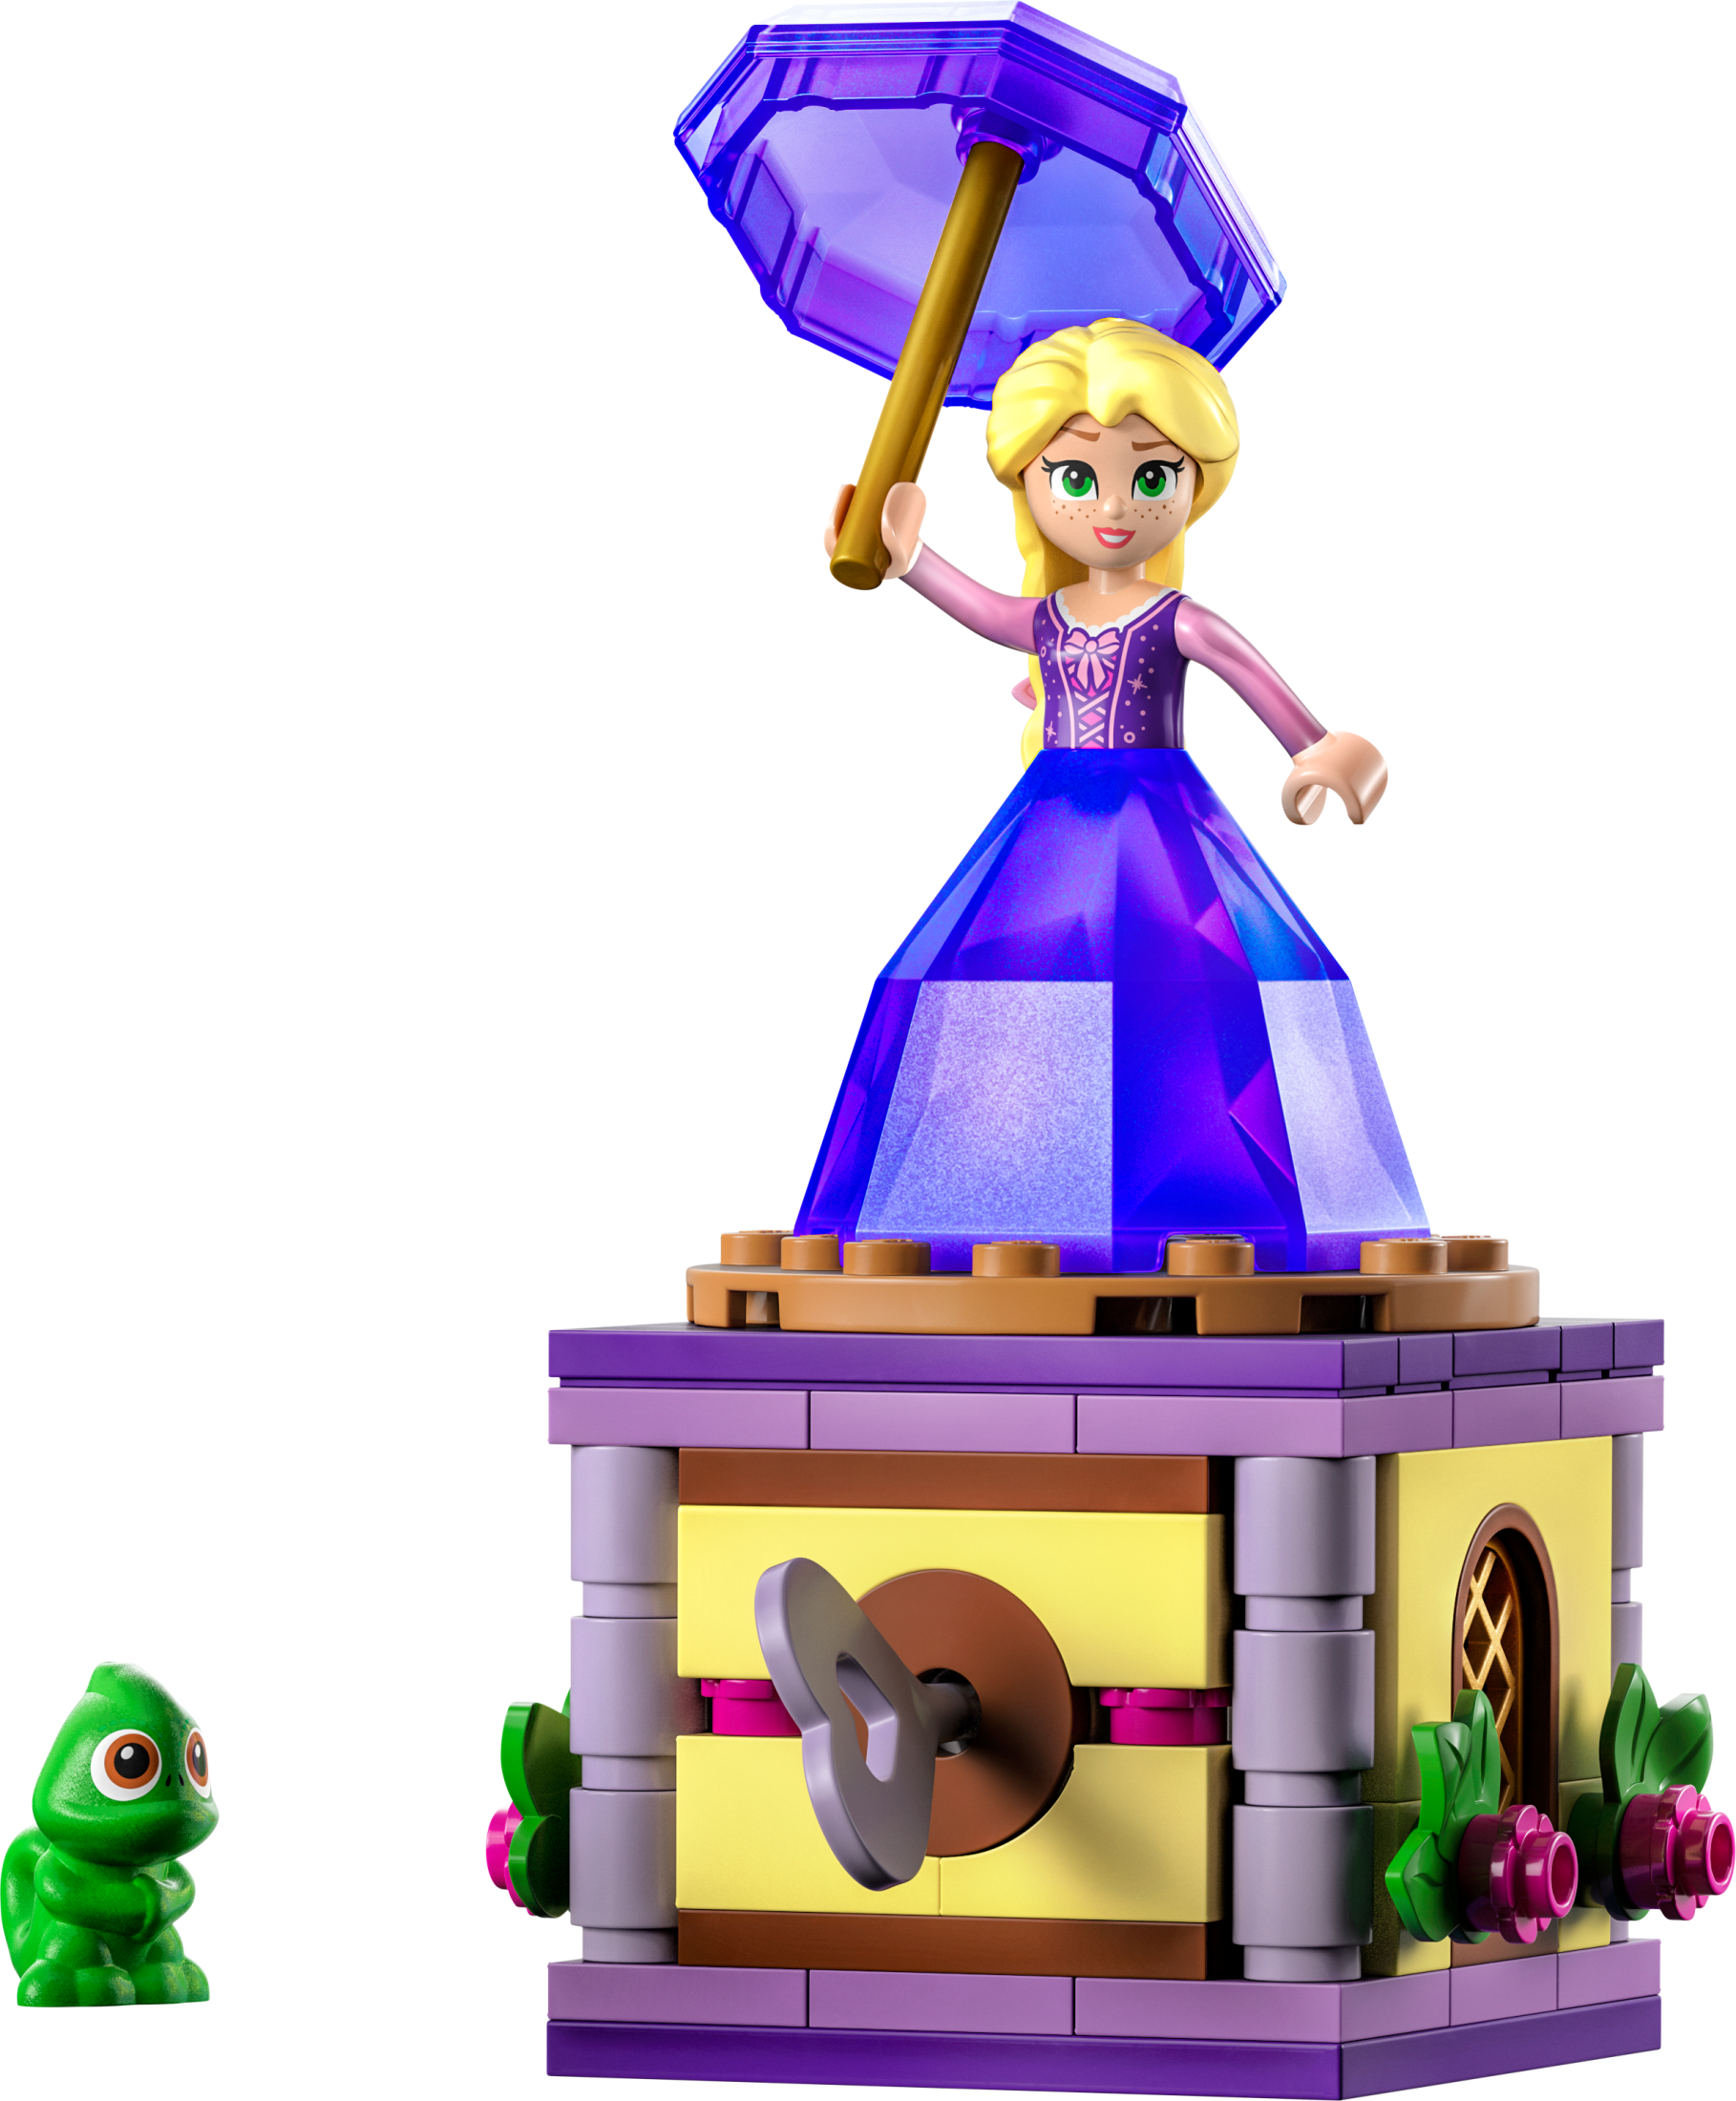 LEGO Disney Princess Twirling Rapunzel Building Toy 43214, with Diamond Dress Mini-Doll and Pascal The Chameleon Figure, Wind Up Toy Rapunzel, Disney Collectible Toy for Girls & Boys Age 5+ Years Old - image 4 of 8